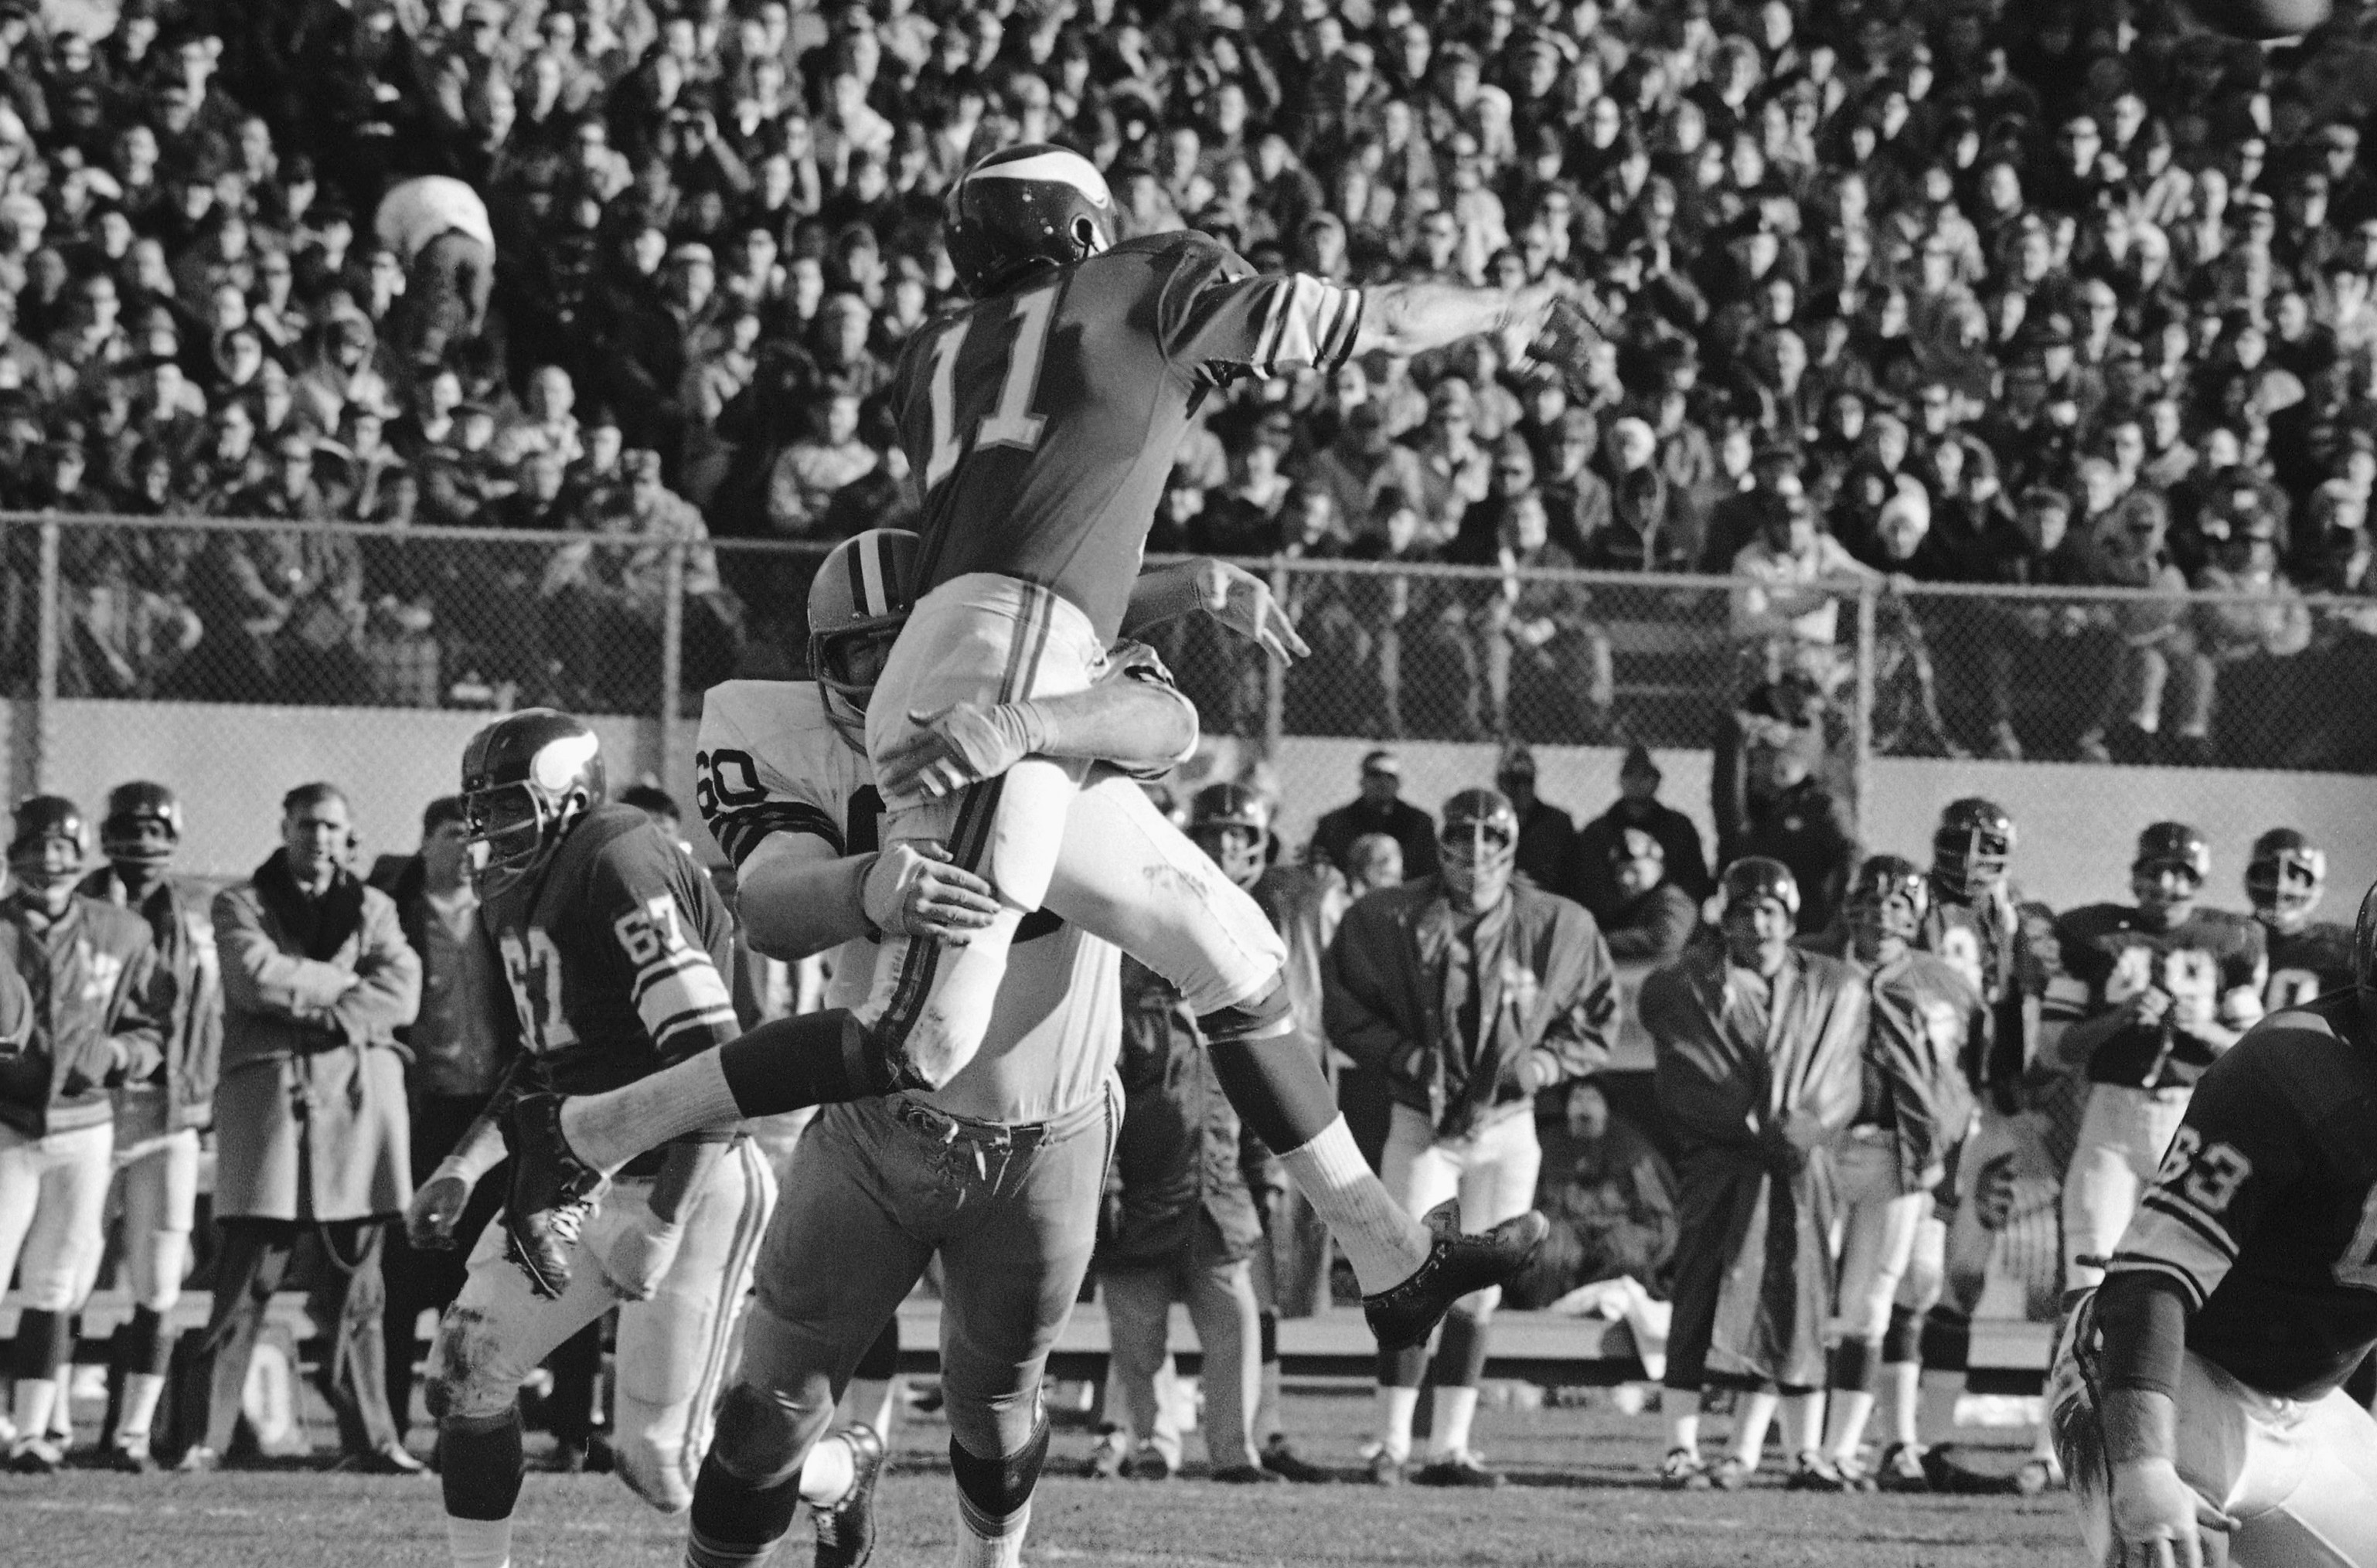 Minnesota Viking quarterback Joe Kapp is lifted high into the air by Green Bay Packers' Lee Roy Caffey (60) after pass by Kapp in first half of National Football League game in Twin Cities on Sunday, Dec. 3, 1967 in Minneapolis. Pass went incomplete. (AP Photo)